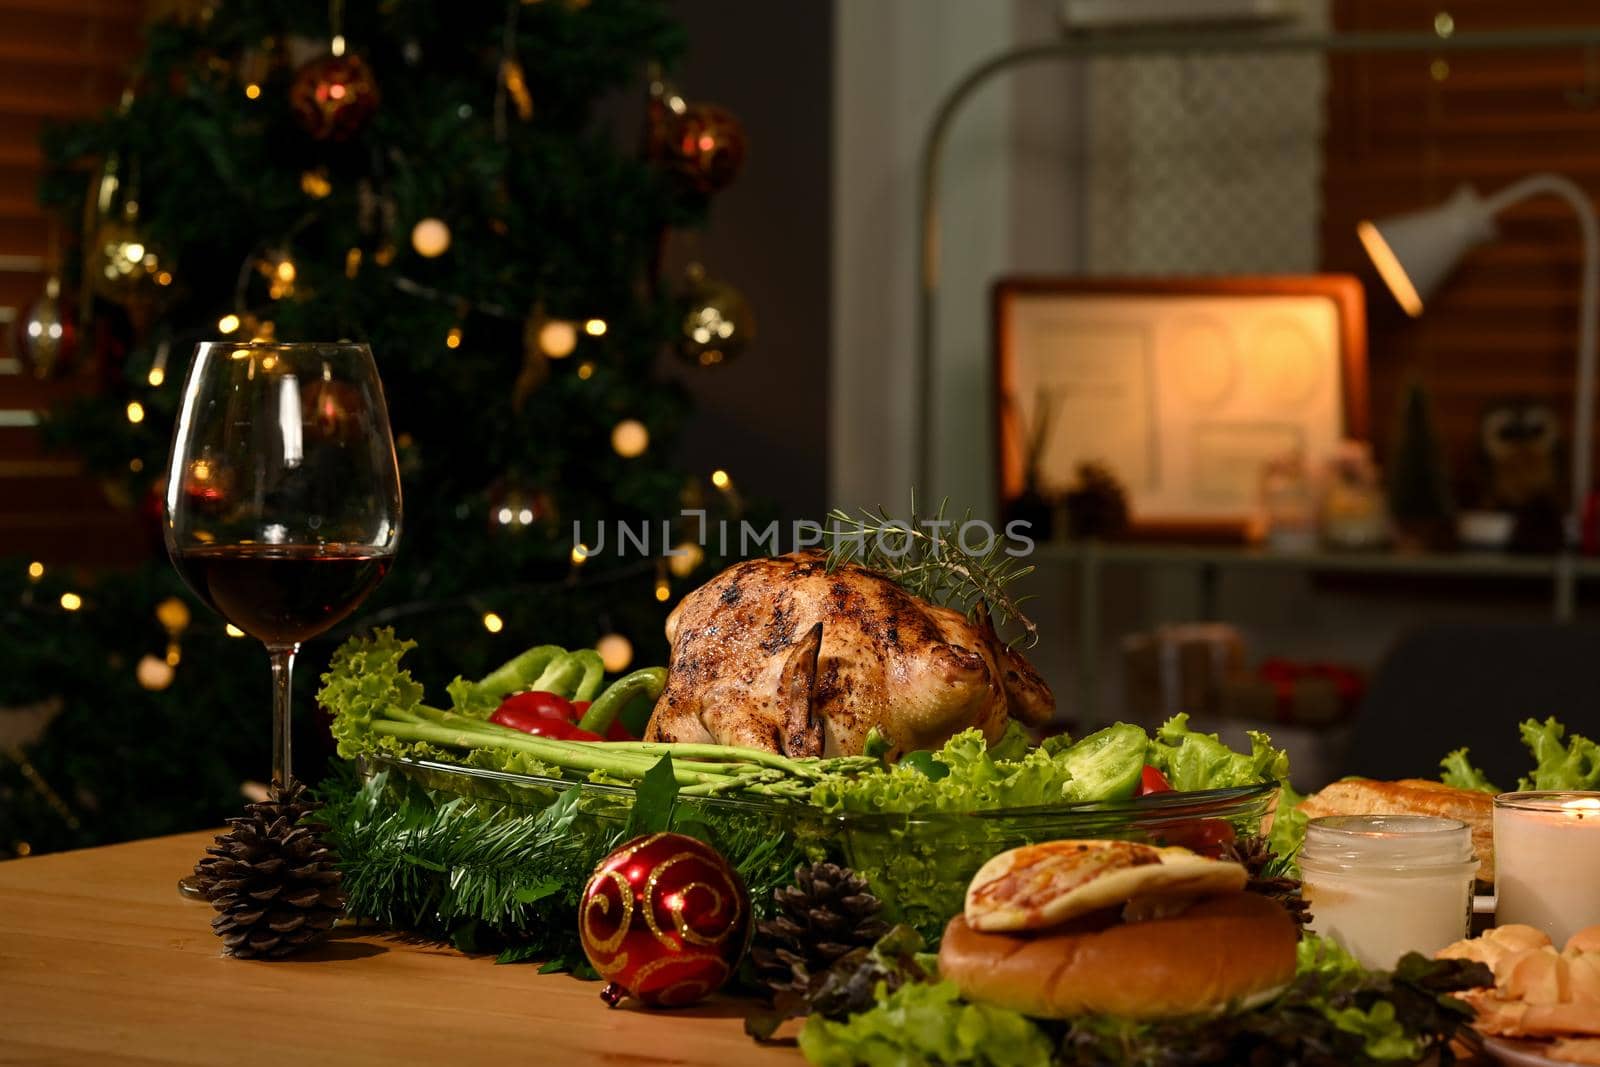 Thanksgiving table with roasted turkey, red wine and sides dishes in decorated room with a Christmas tree by prathanchorruangsak